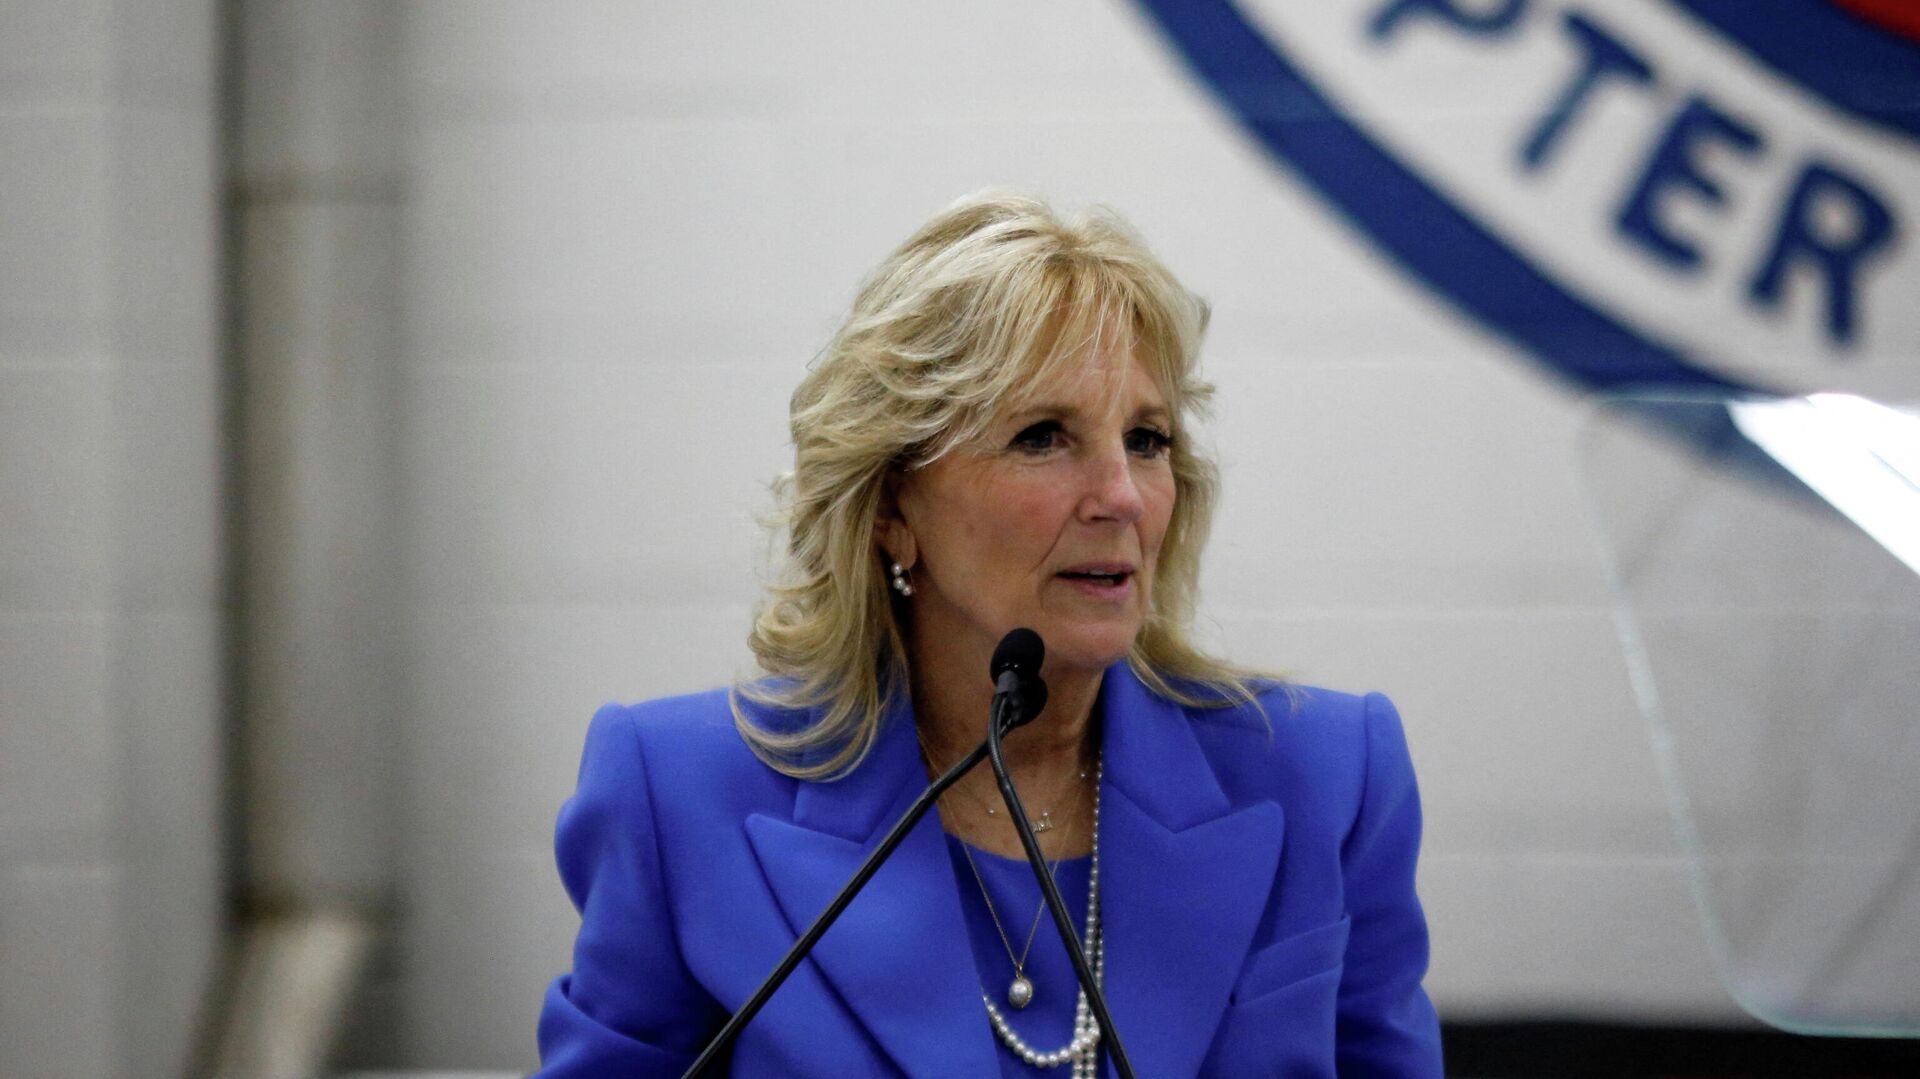 U.S. First Lady Jill Biden delivers remarks during a closed discussion and book reading event with U.S. military families and Blue Star families at the U.S. Coast Guard Air Station Miami in Opa-Locka Executive Airport, in Opa-Locka, Florida, U.S. February 18, 2022 - Sputnik International, 1920, 01.03.2022